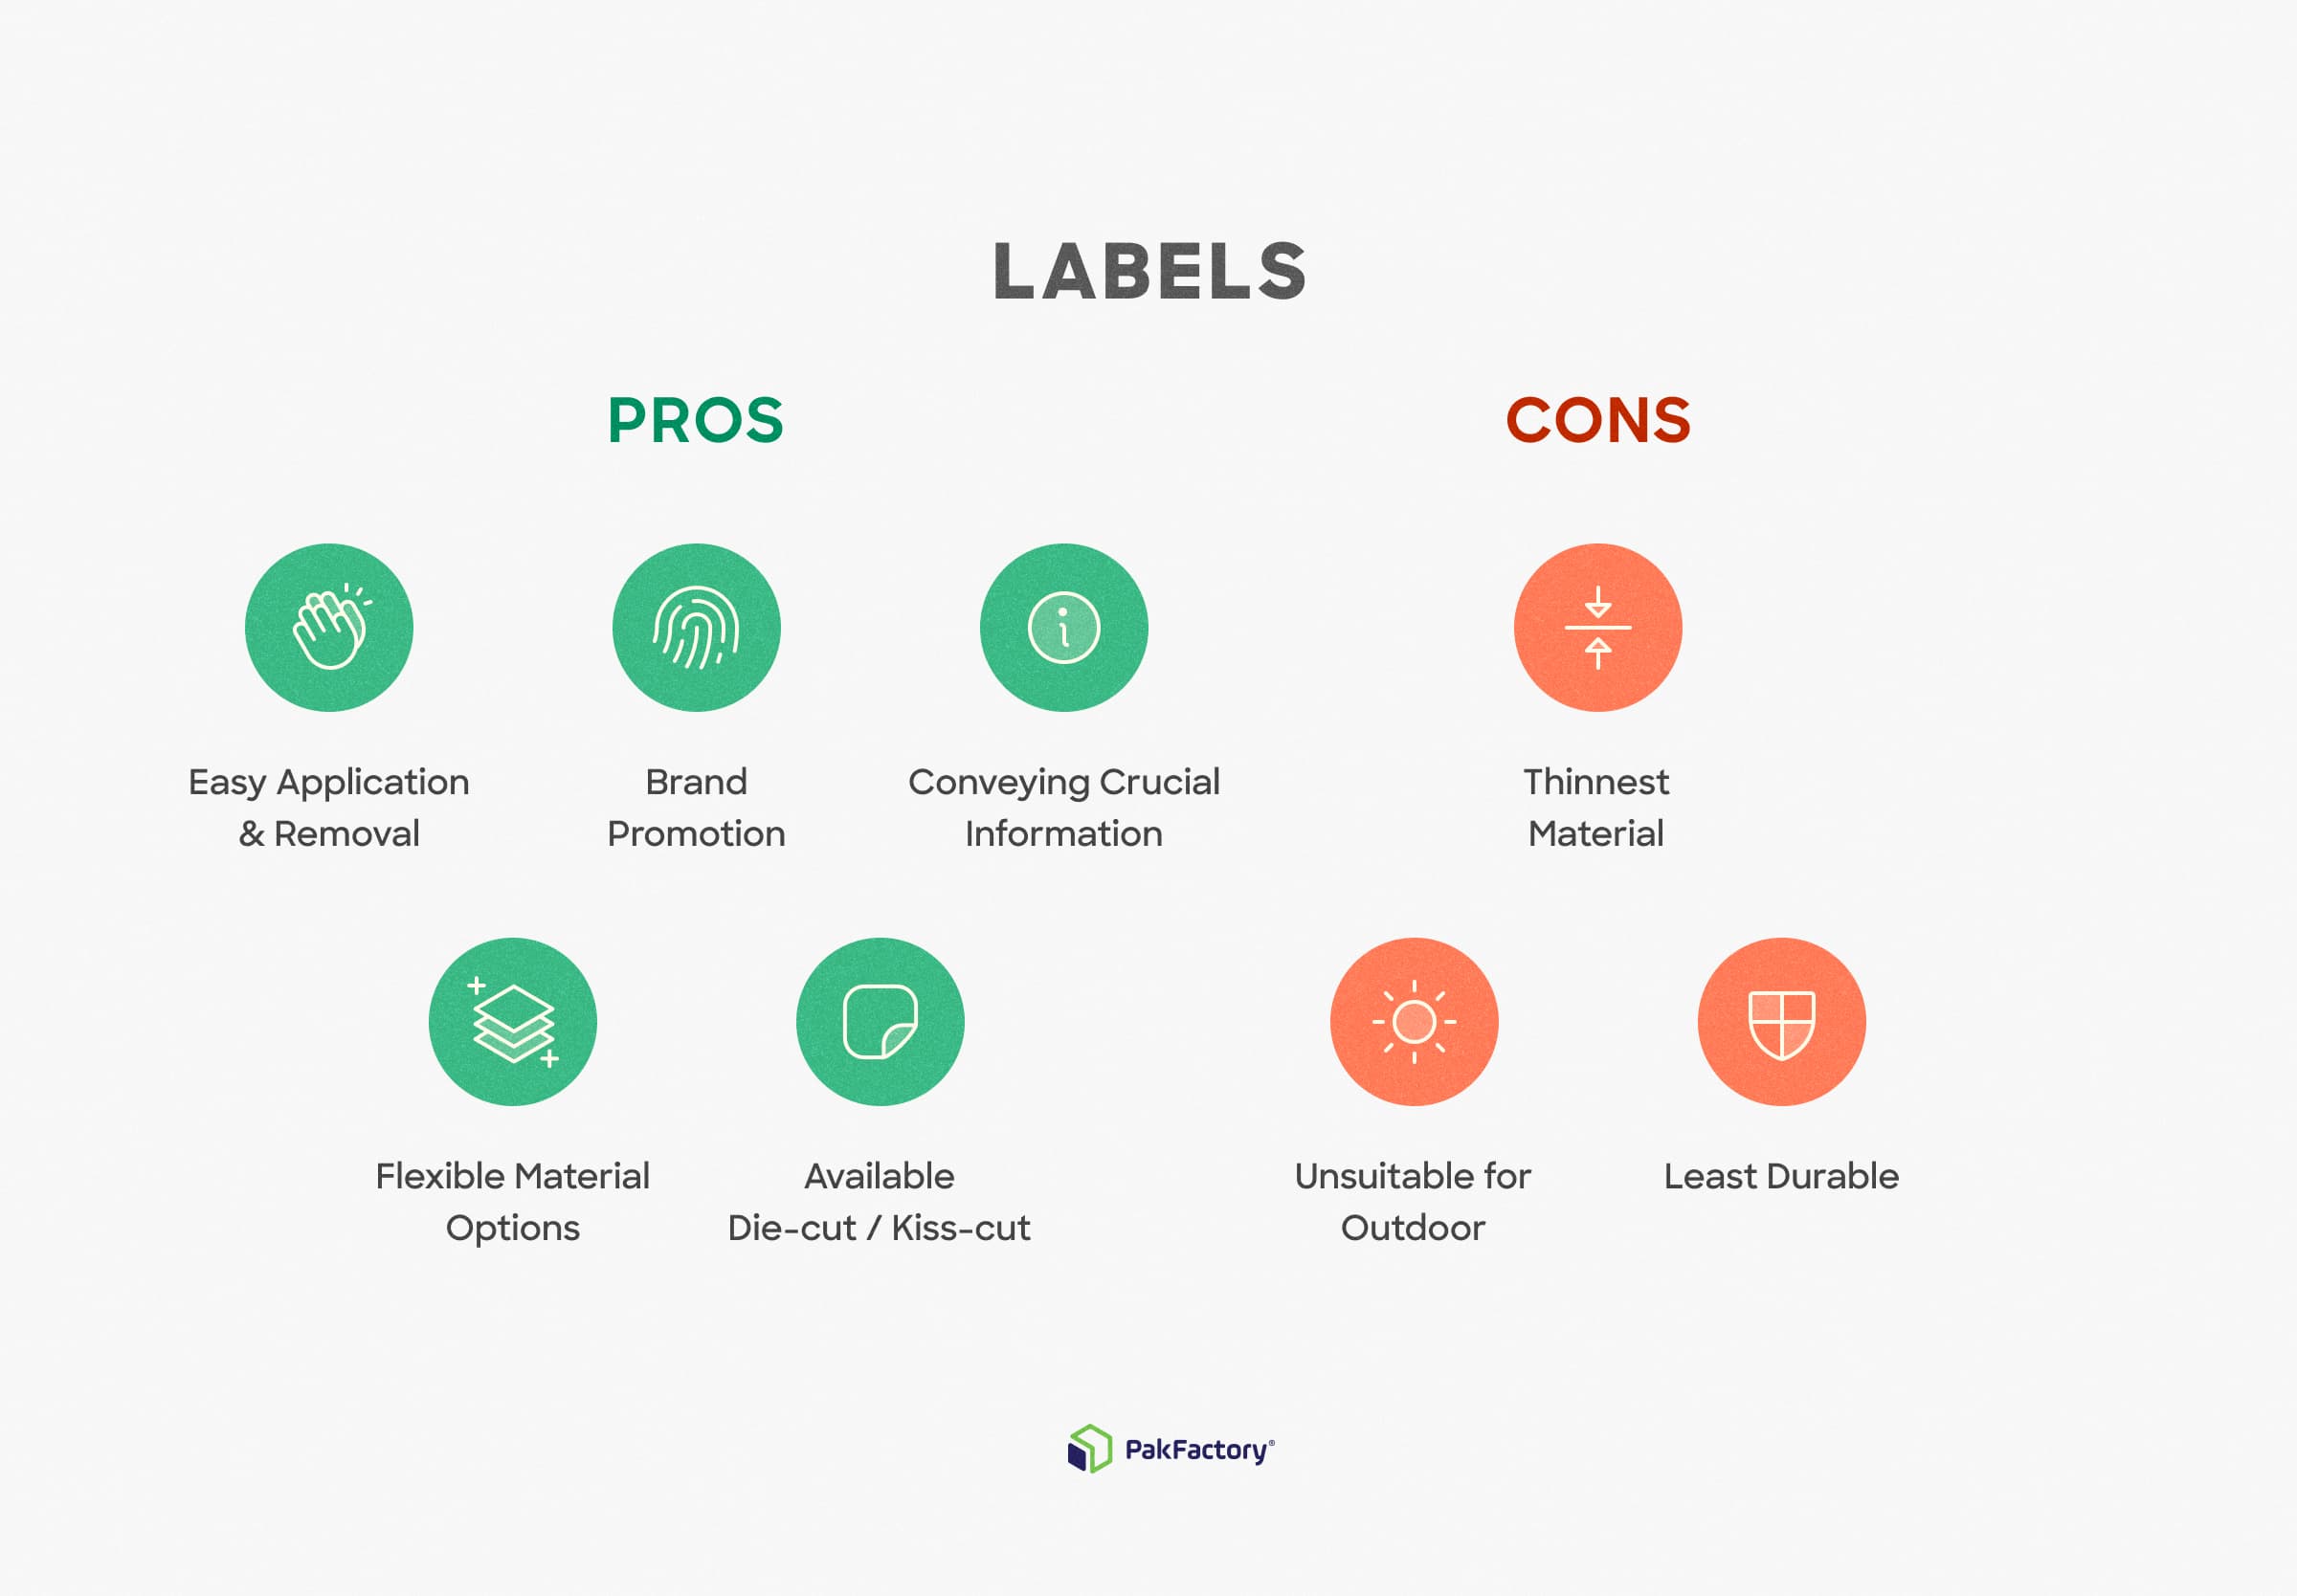 the pros and cons diagram of labels